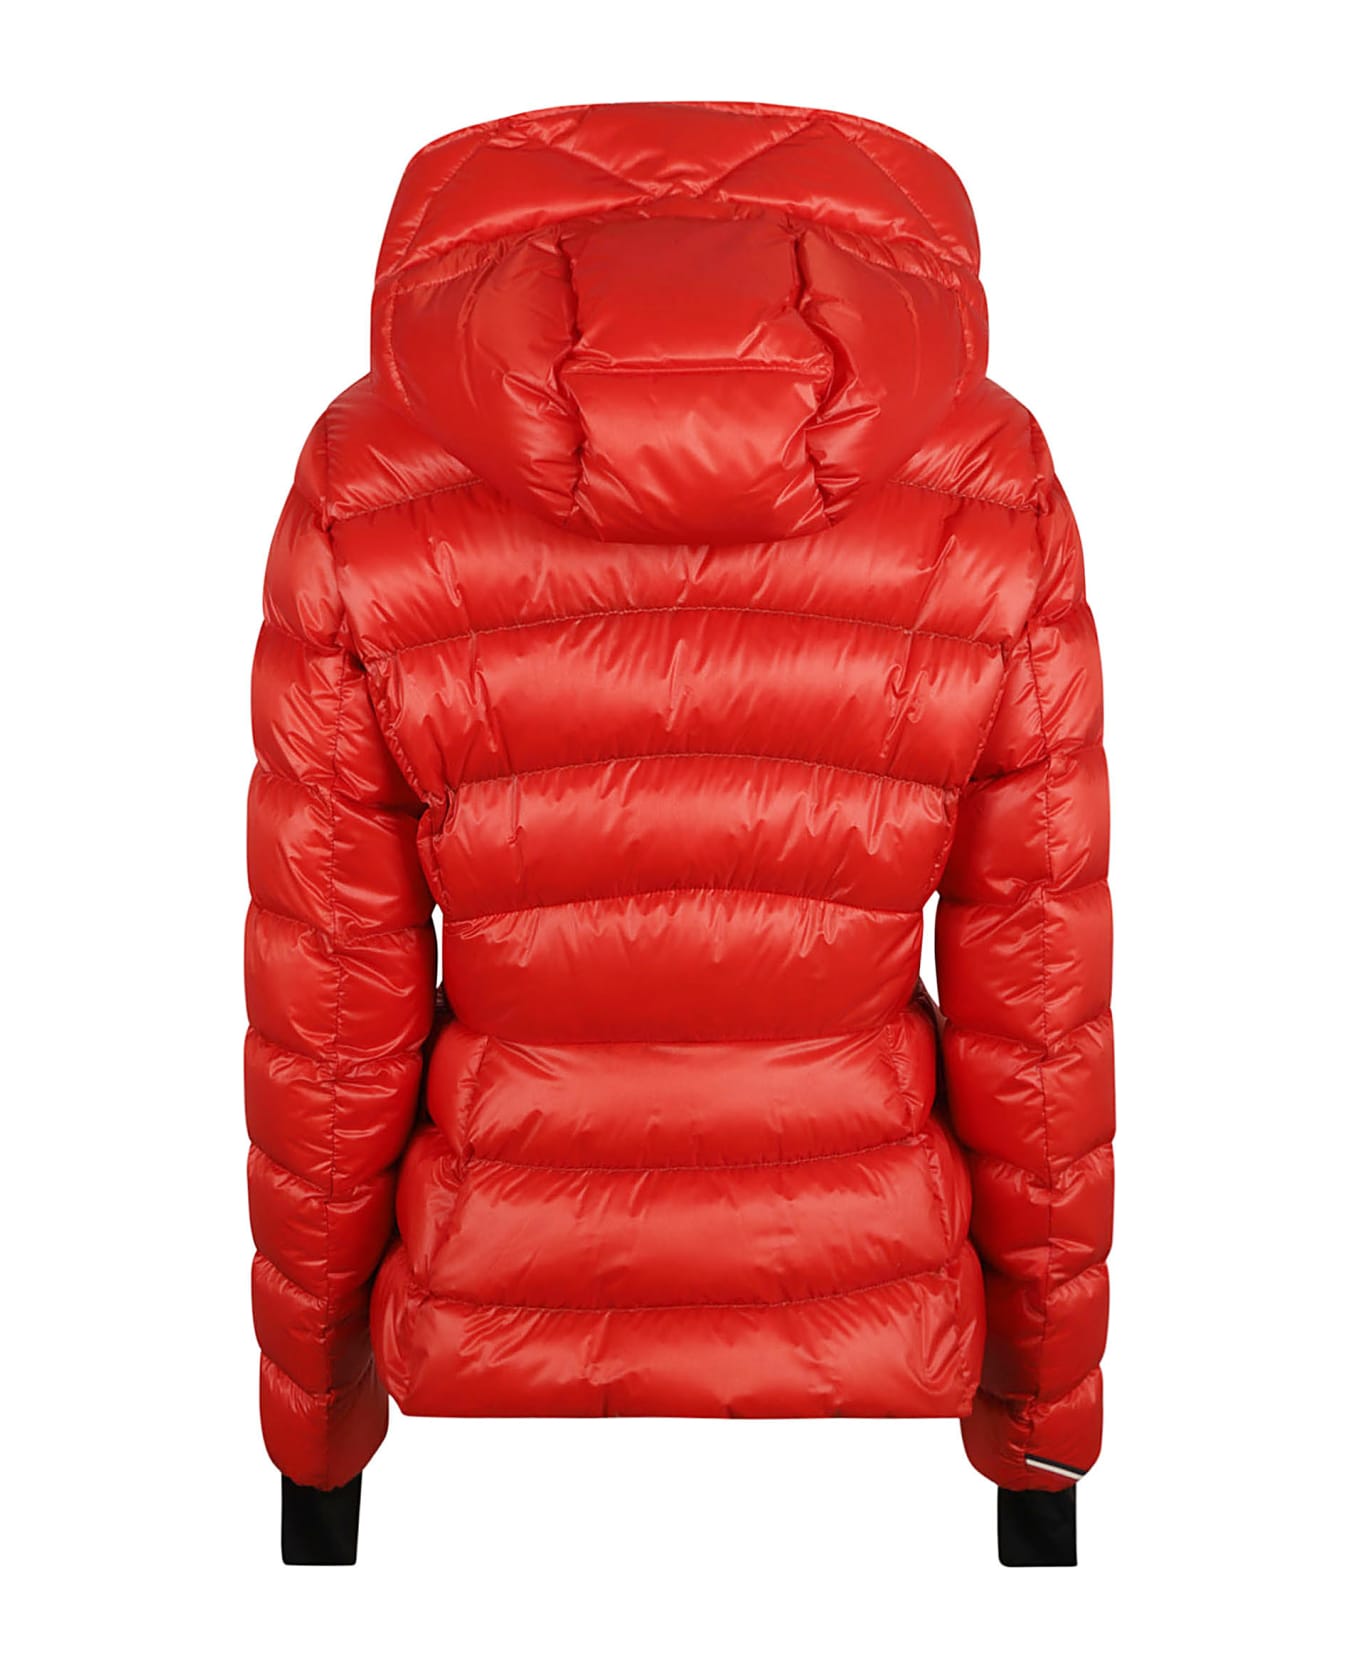 Moncler Grenoble Armoniques Padded Jacket - Red